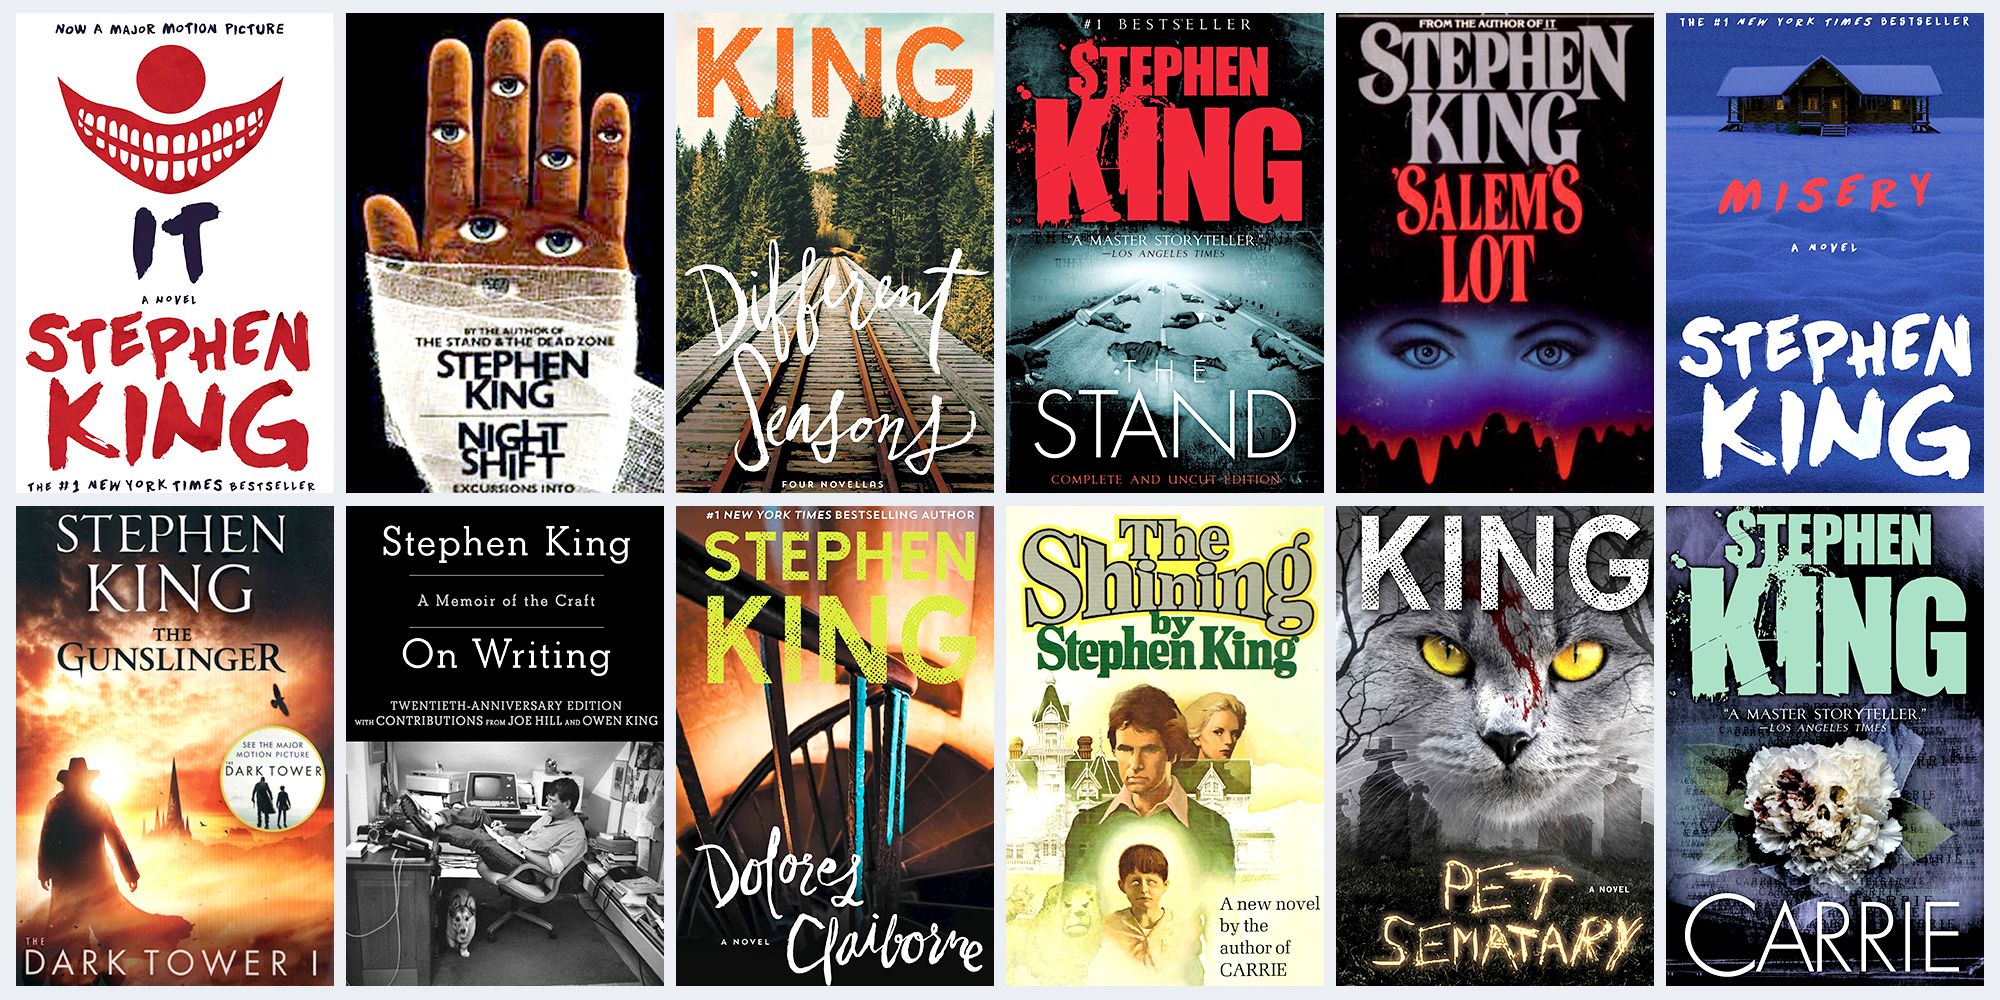 Stephen King's Son Owen on 'The Stand' TV Series vs Book Differences